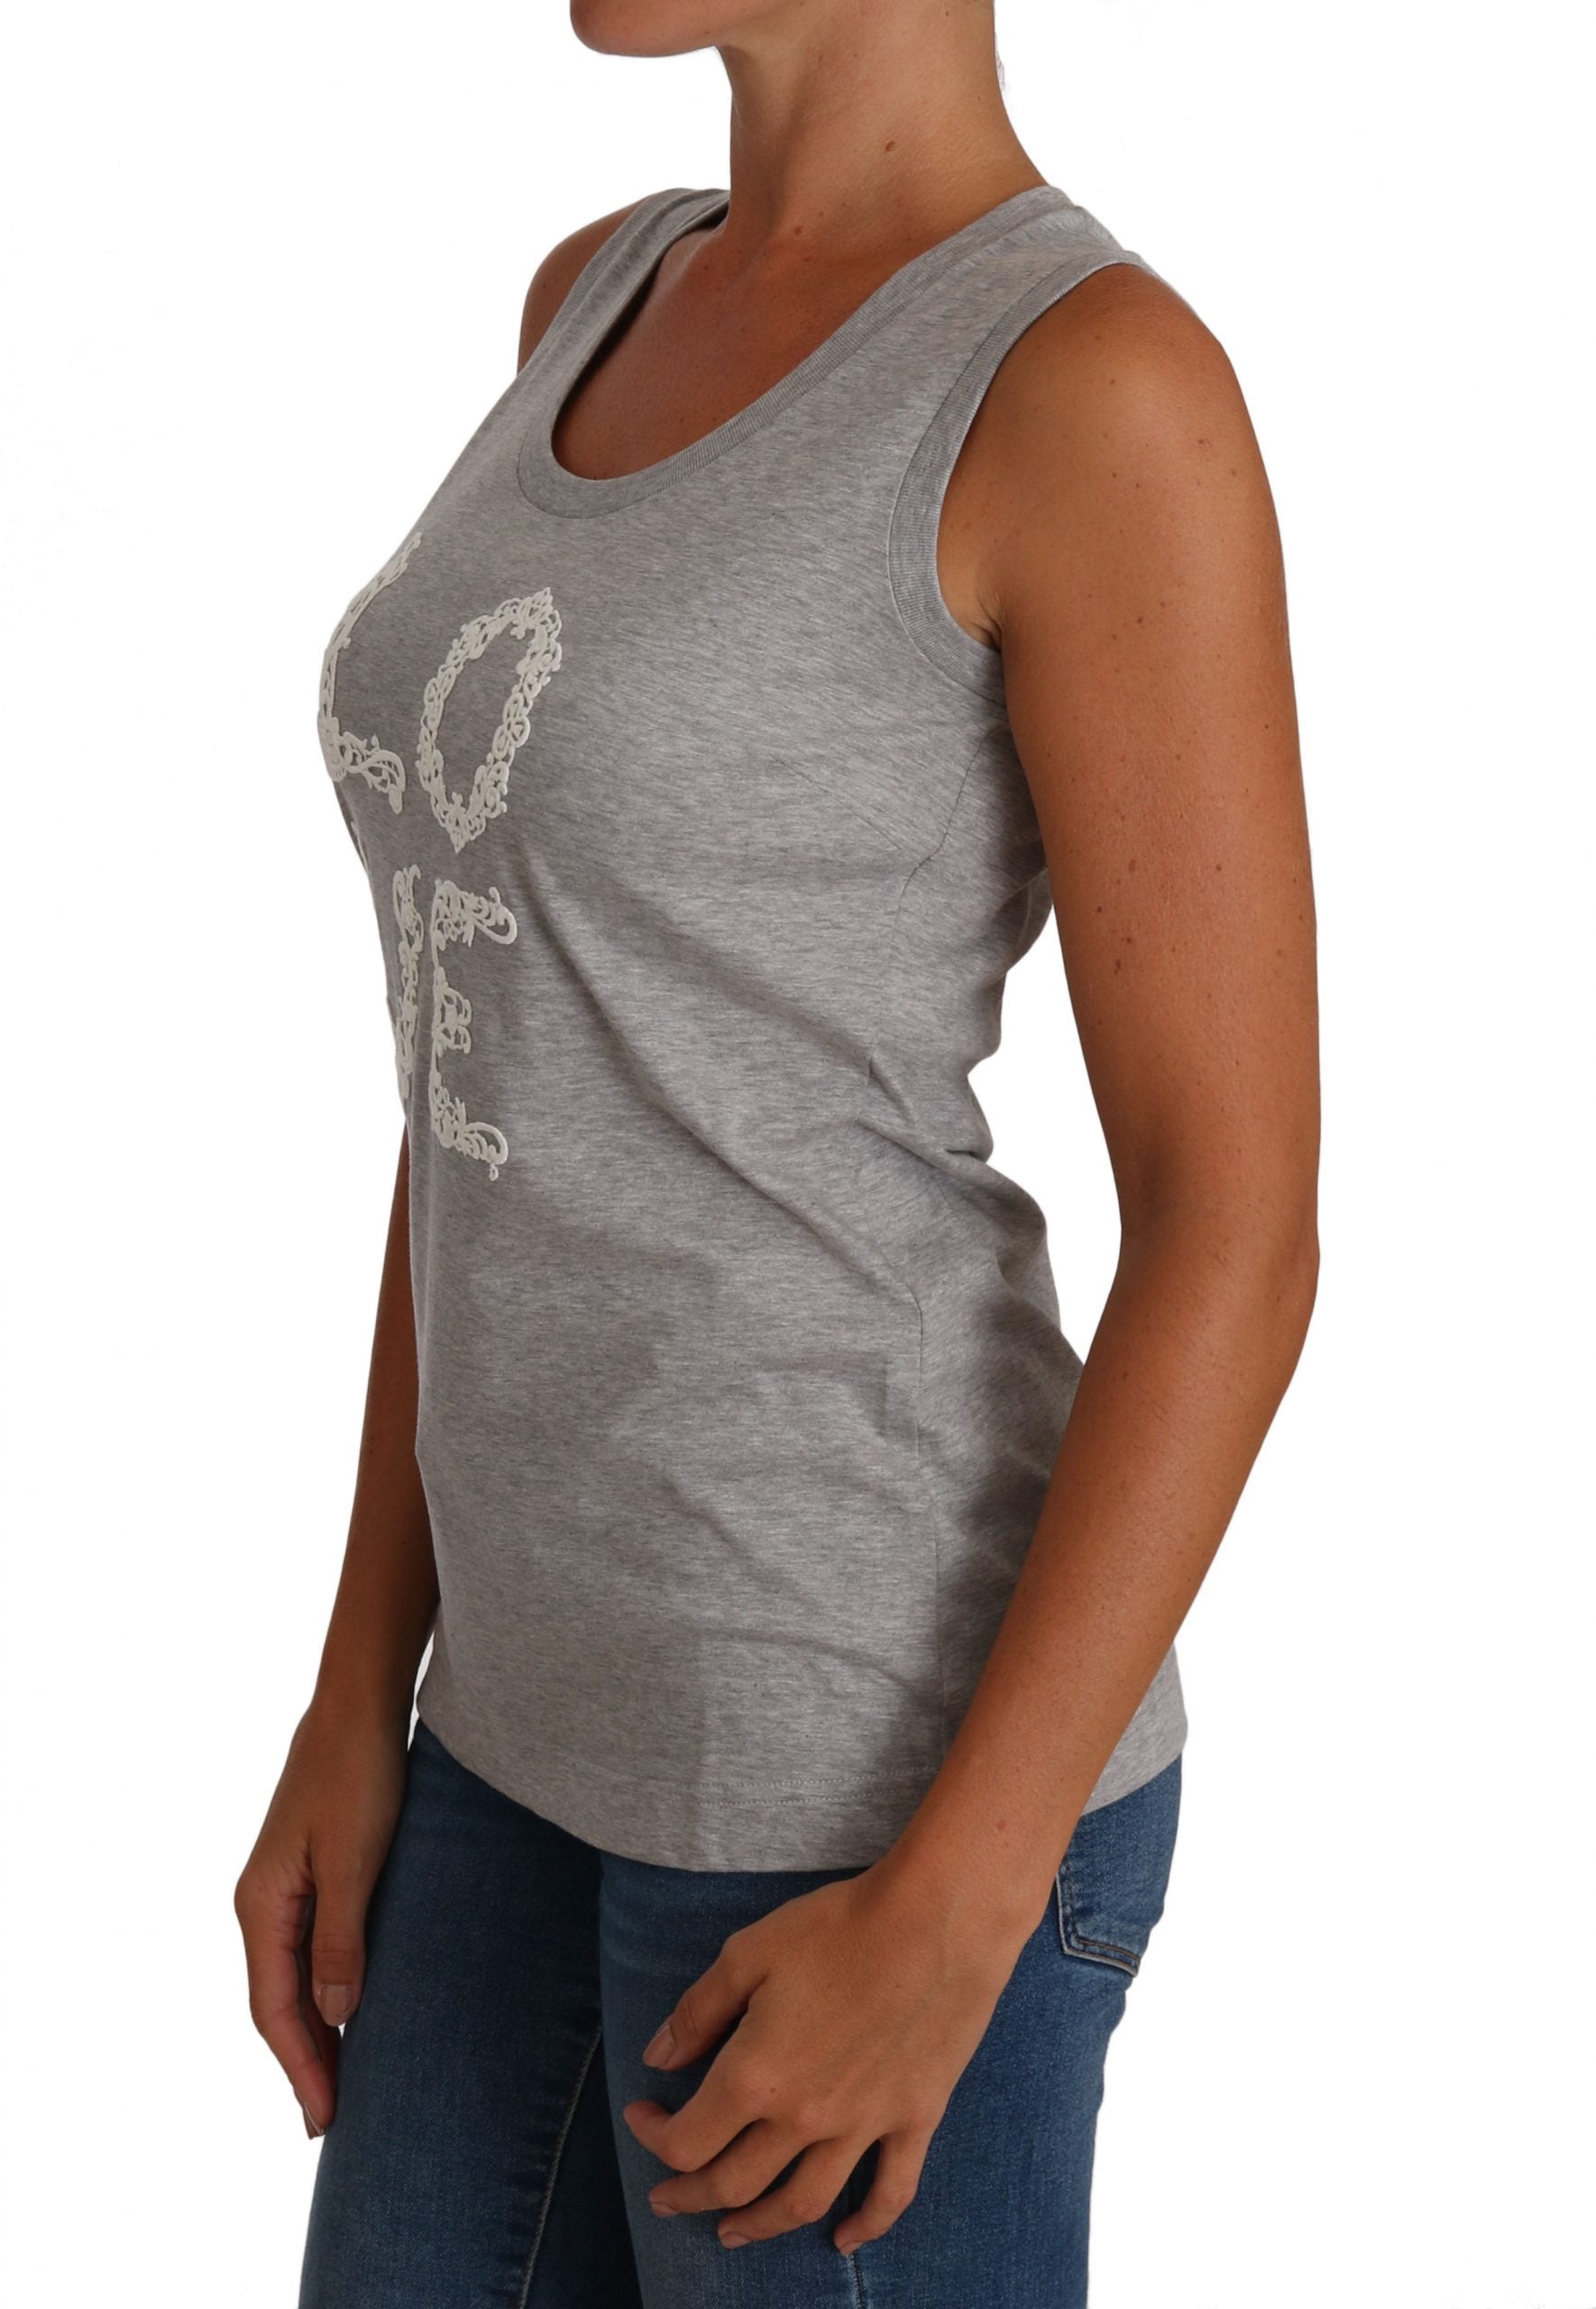 Buy Gray and white Cami Tank Gray LOVE Cotton Top by Dolce & Gabbana